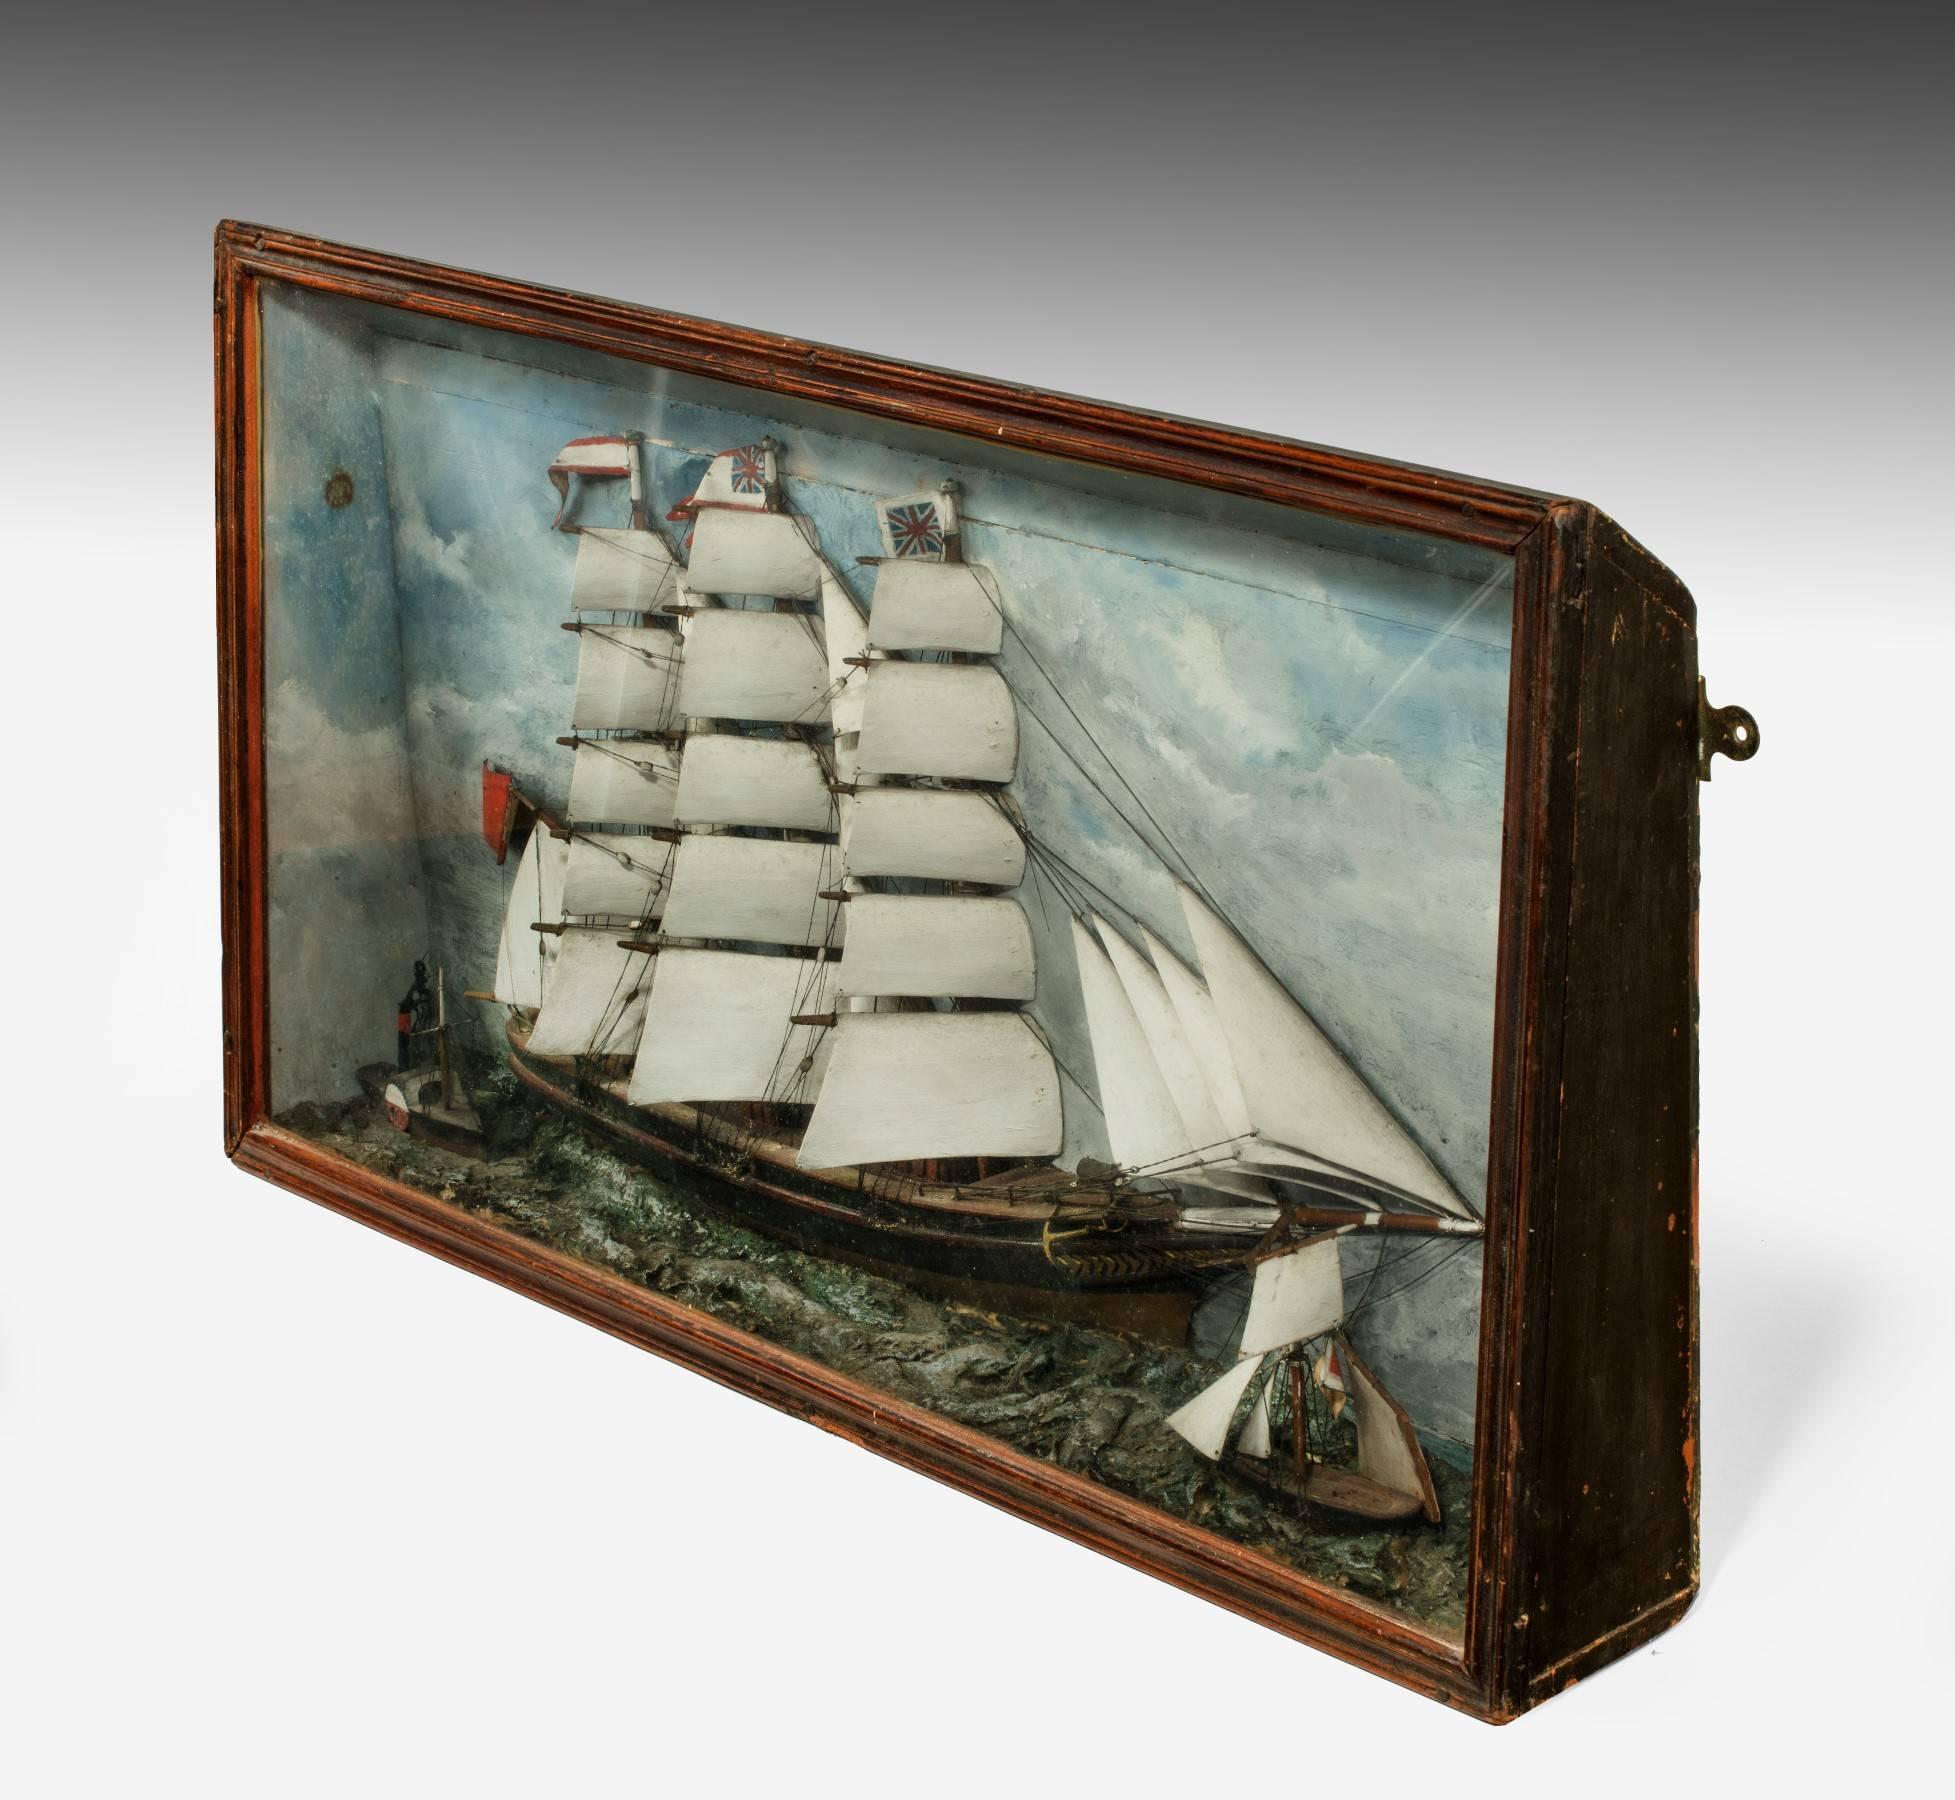 This Diorama has the main three mast sailing ship and two smaller boats flanking it. It is in original condition and the box frame is tapered in profile. The colors and quality are very good and this is a really decent example of good size. It is